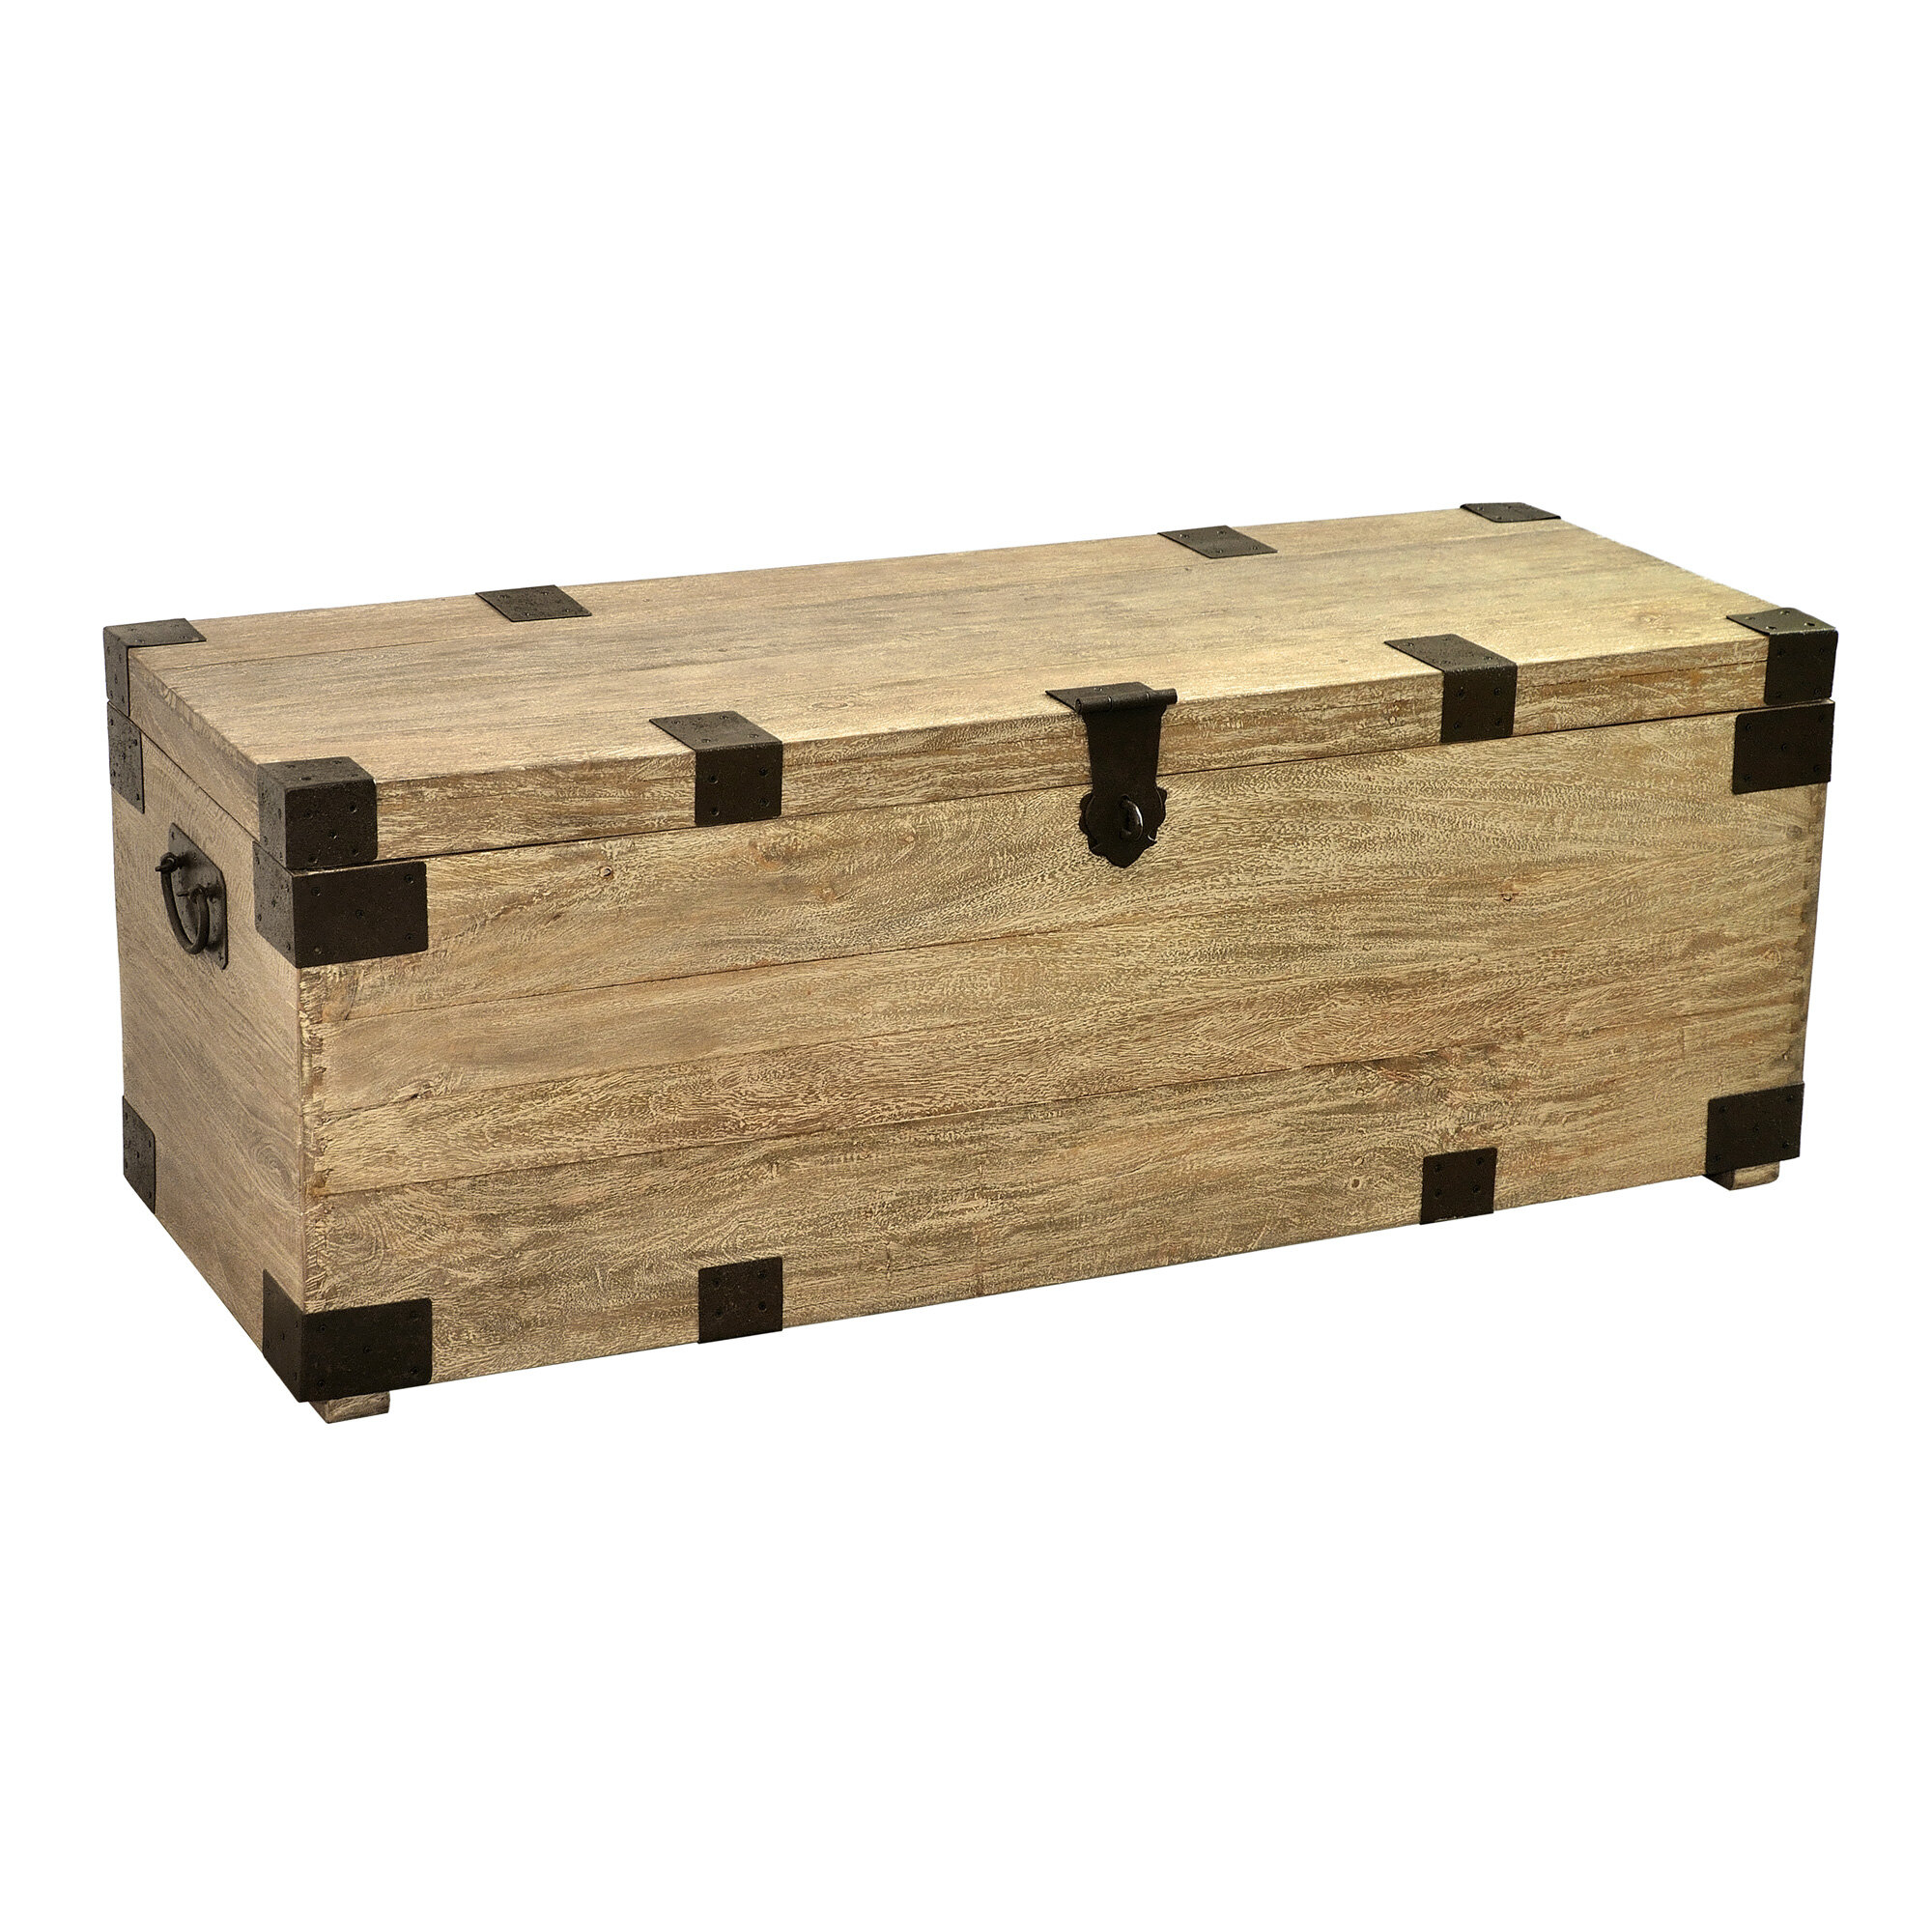 Natural finish large pine wood storage trunk DD168 30x20x15CM crate case toy box 